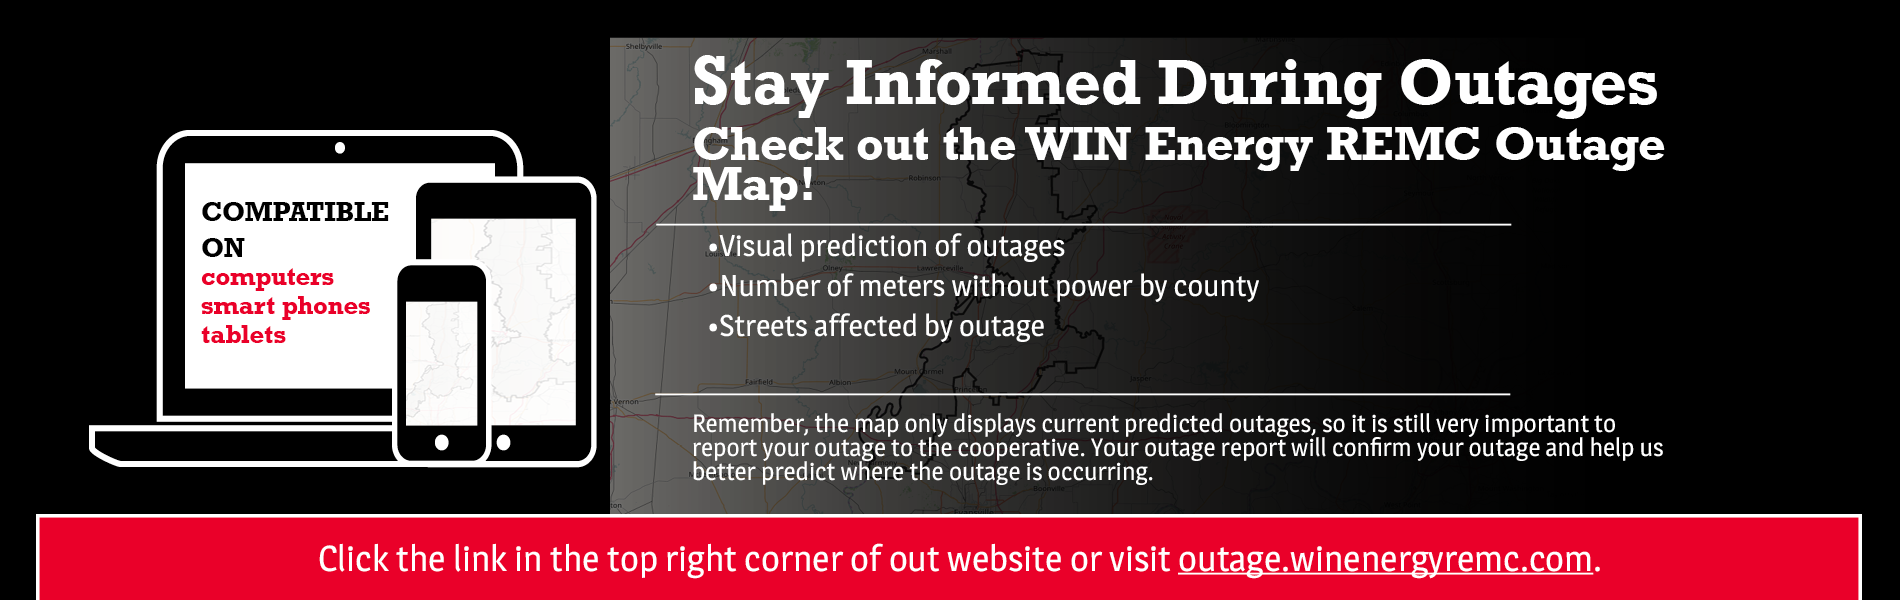 Learn more about the WIN Energy REMC Outage Map